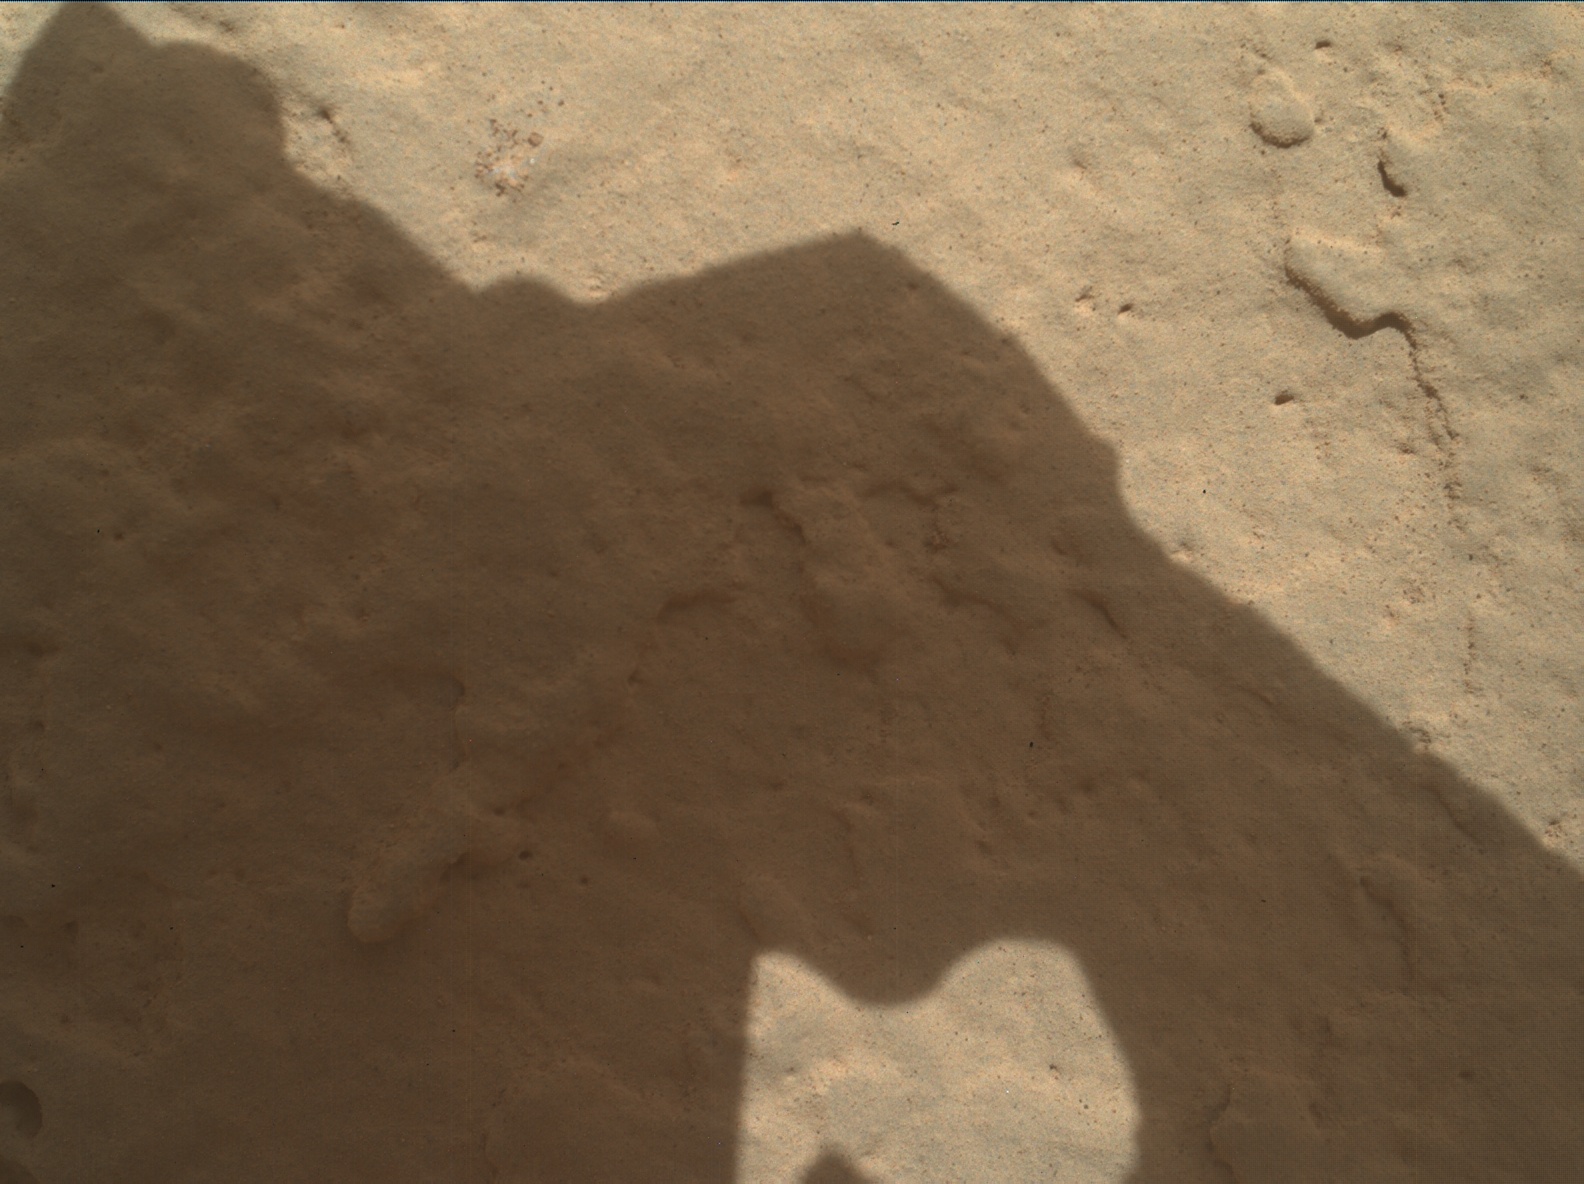 Nasa's Mars rover Curiosity acquired this image using its Mars Hand Lens Imager (MAHLI) on Sol 3899